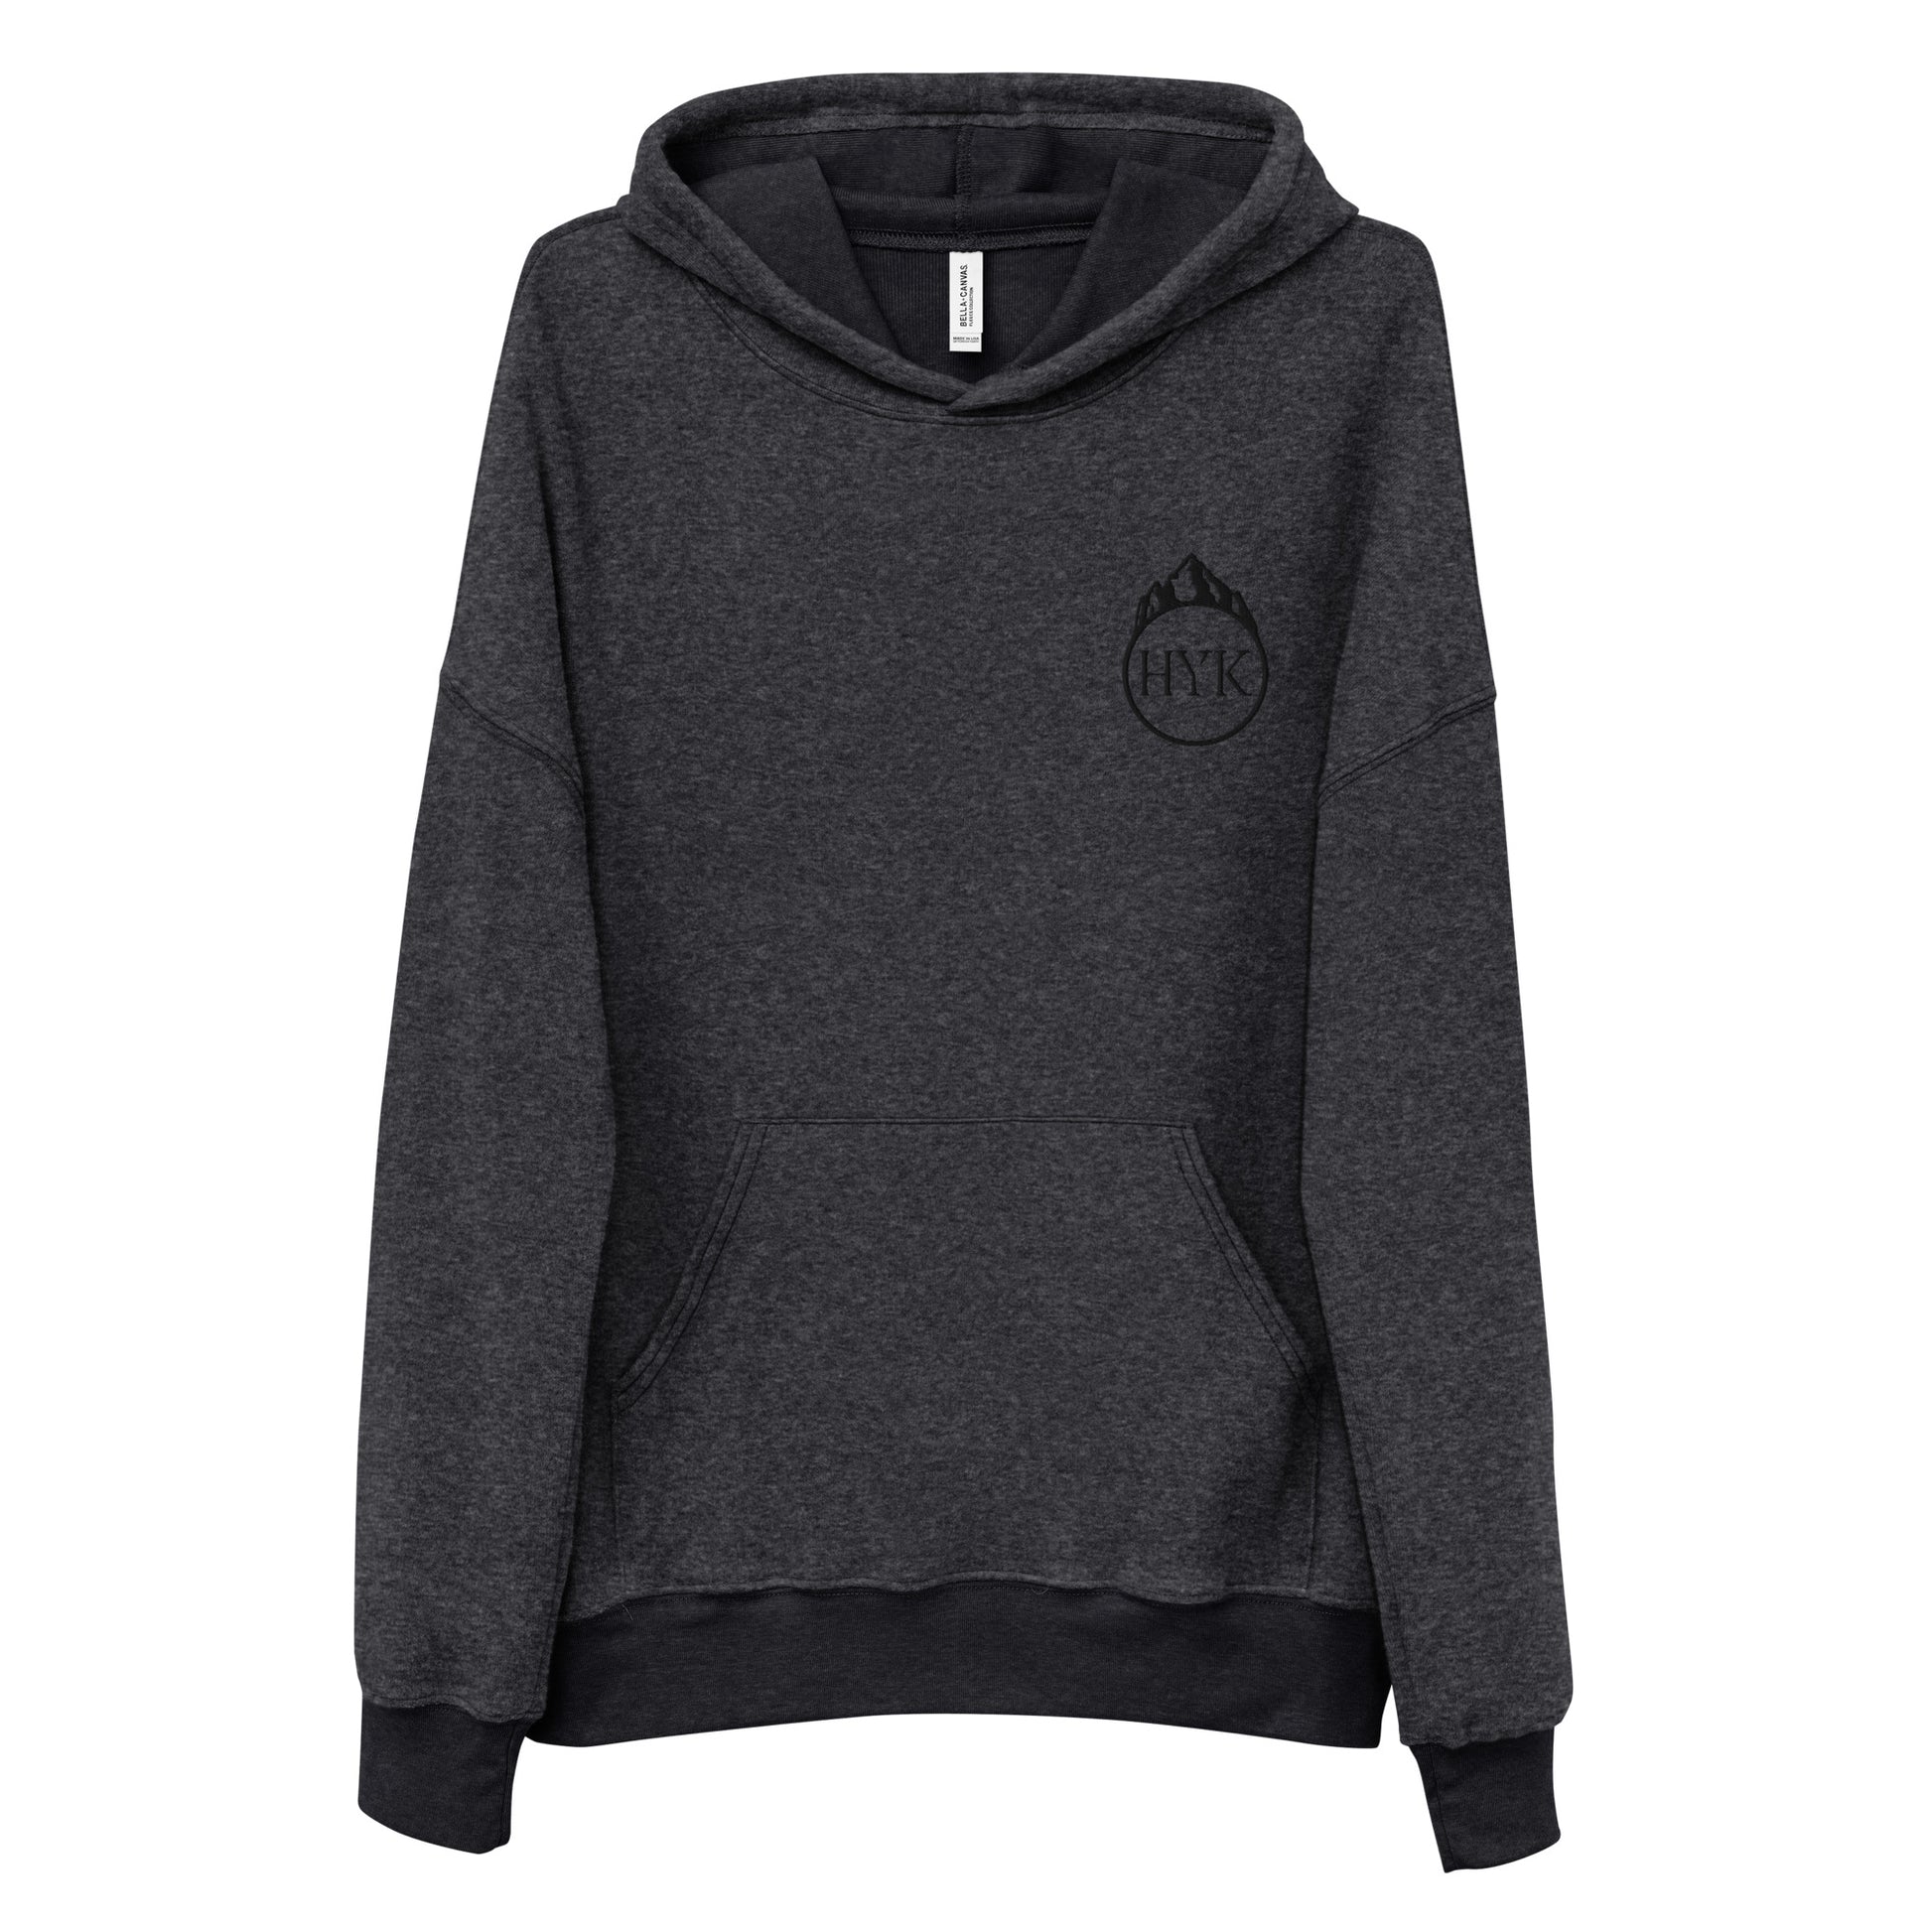 high quality organic cotton fleece hoodie for home or outdoor adventure sports